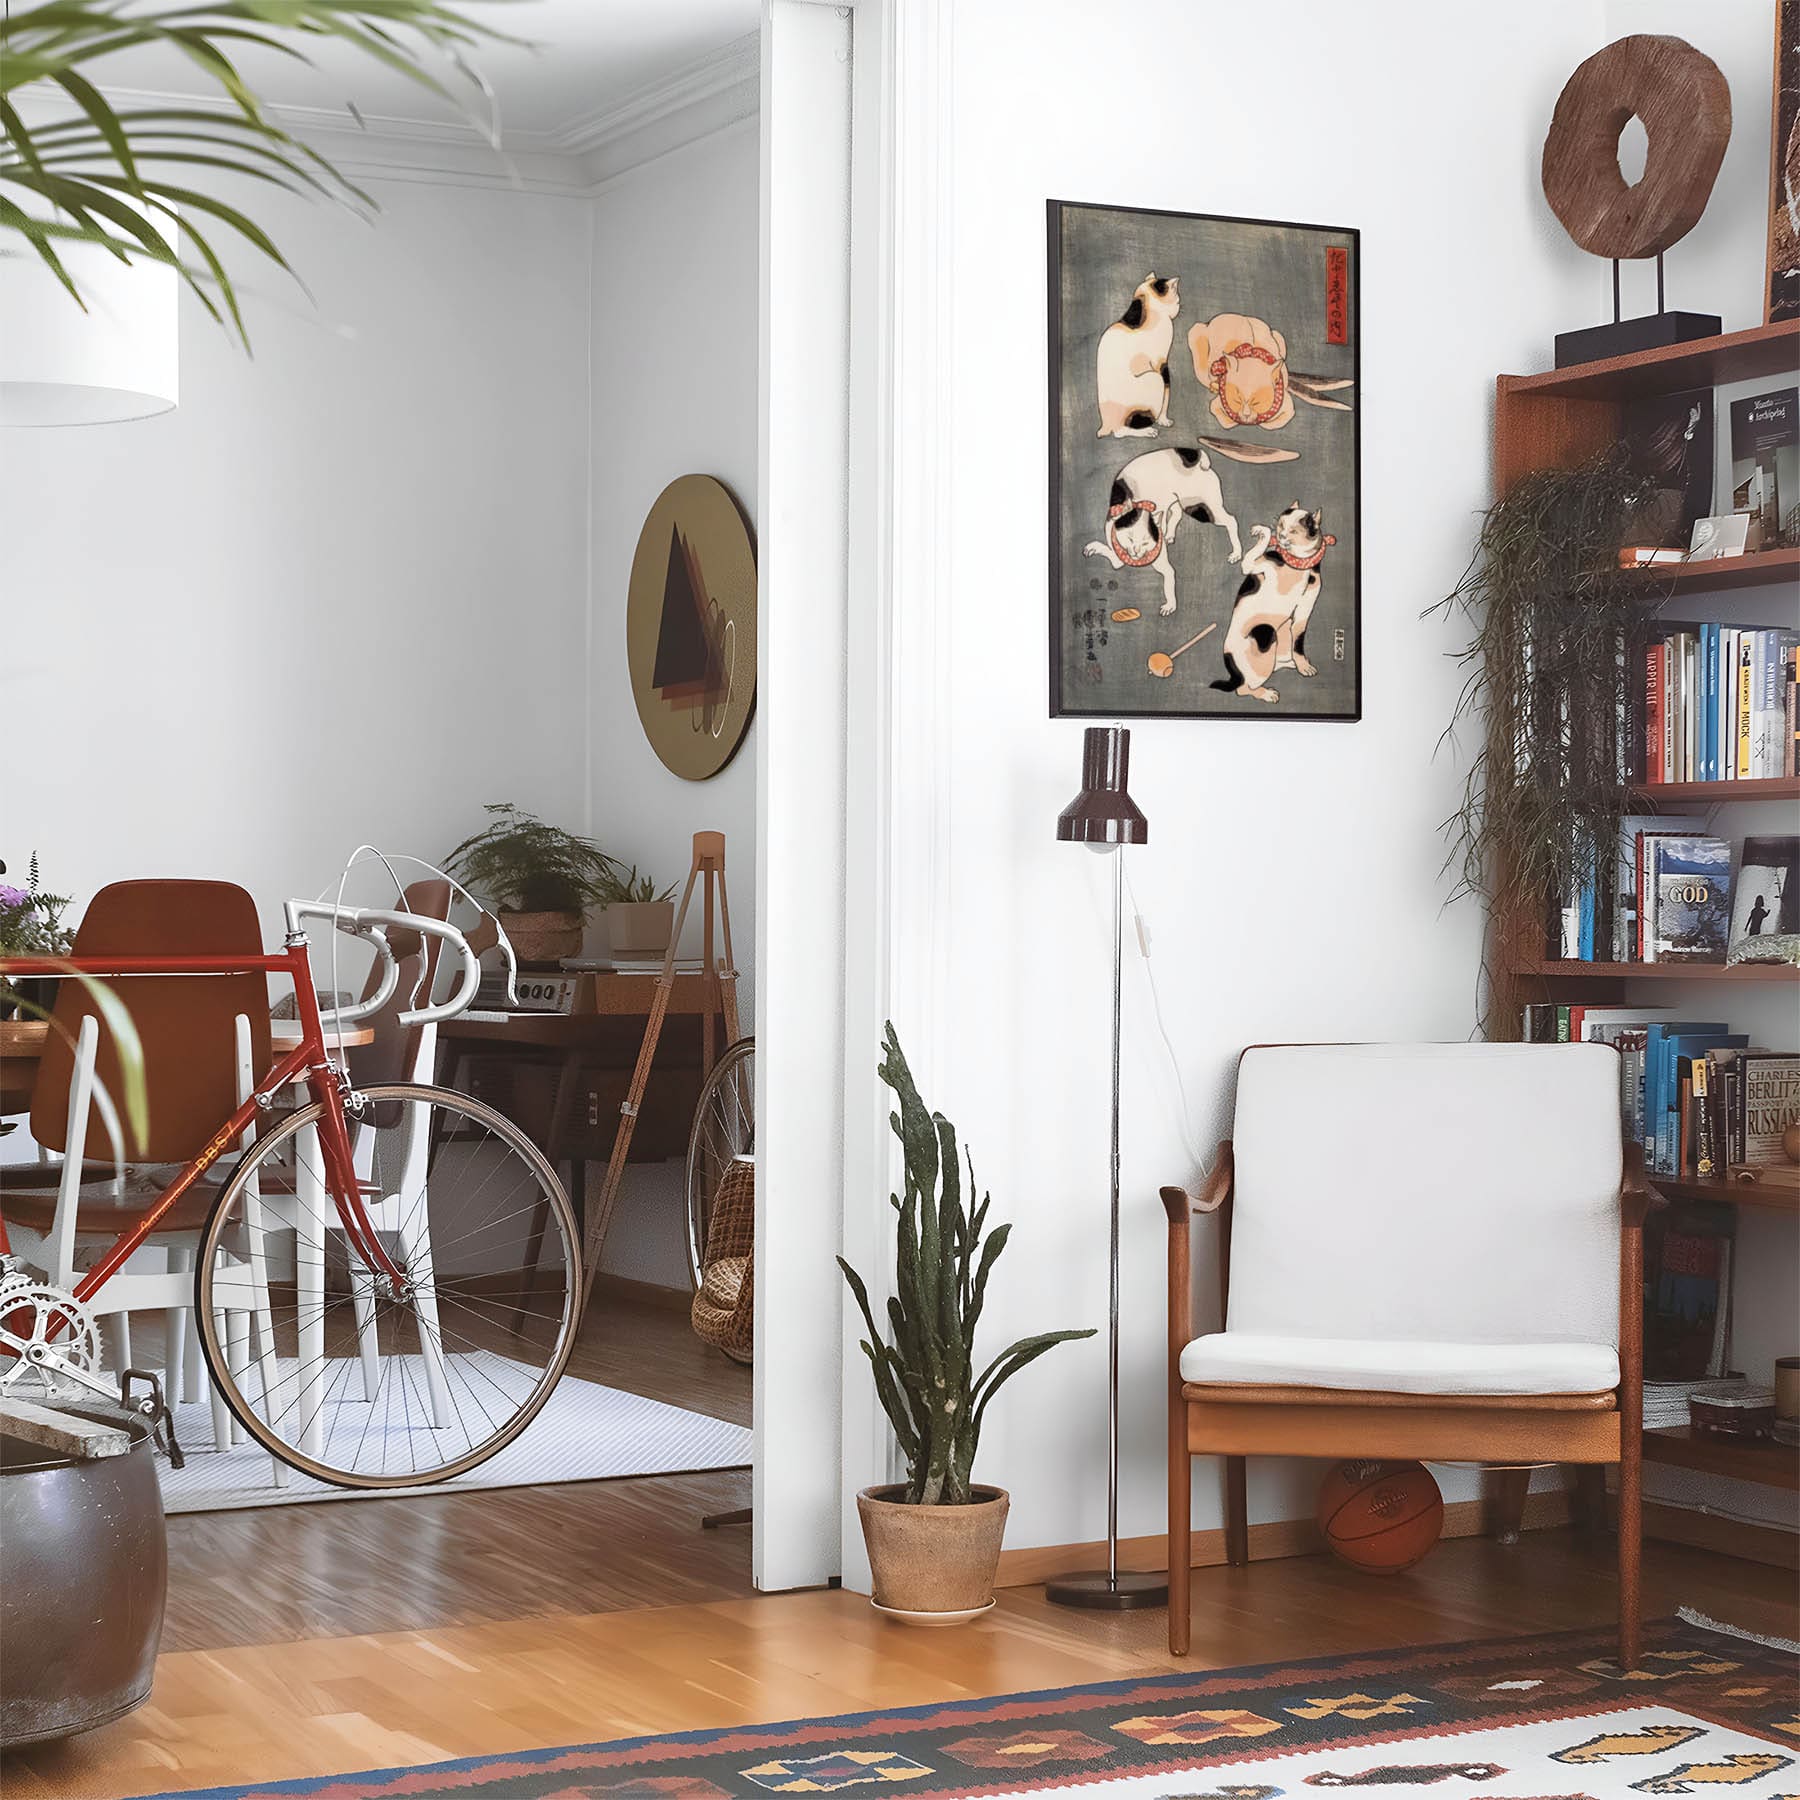 Eclectic living room with a road bike, bookshelf and house plants that features framed artwork of a Cats Playing above a chair and lamp